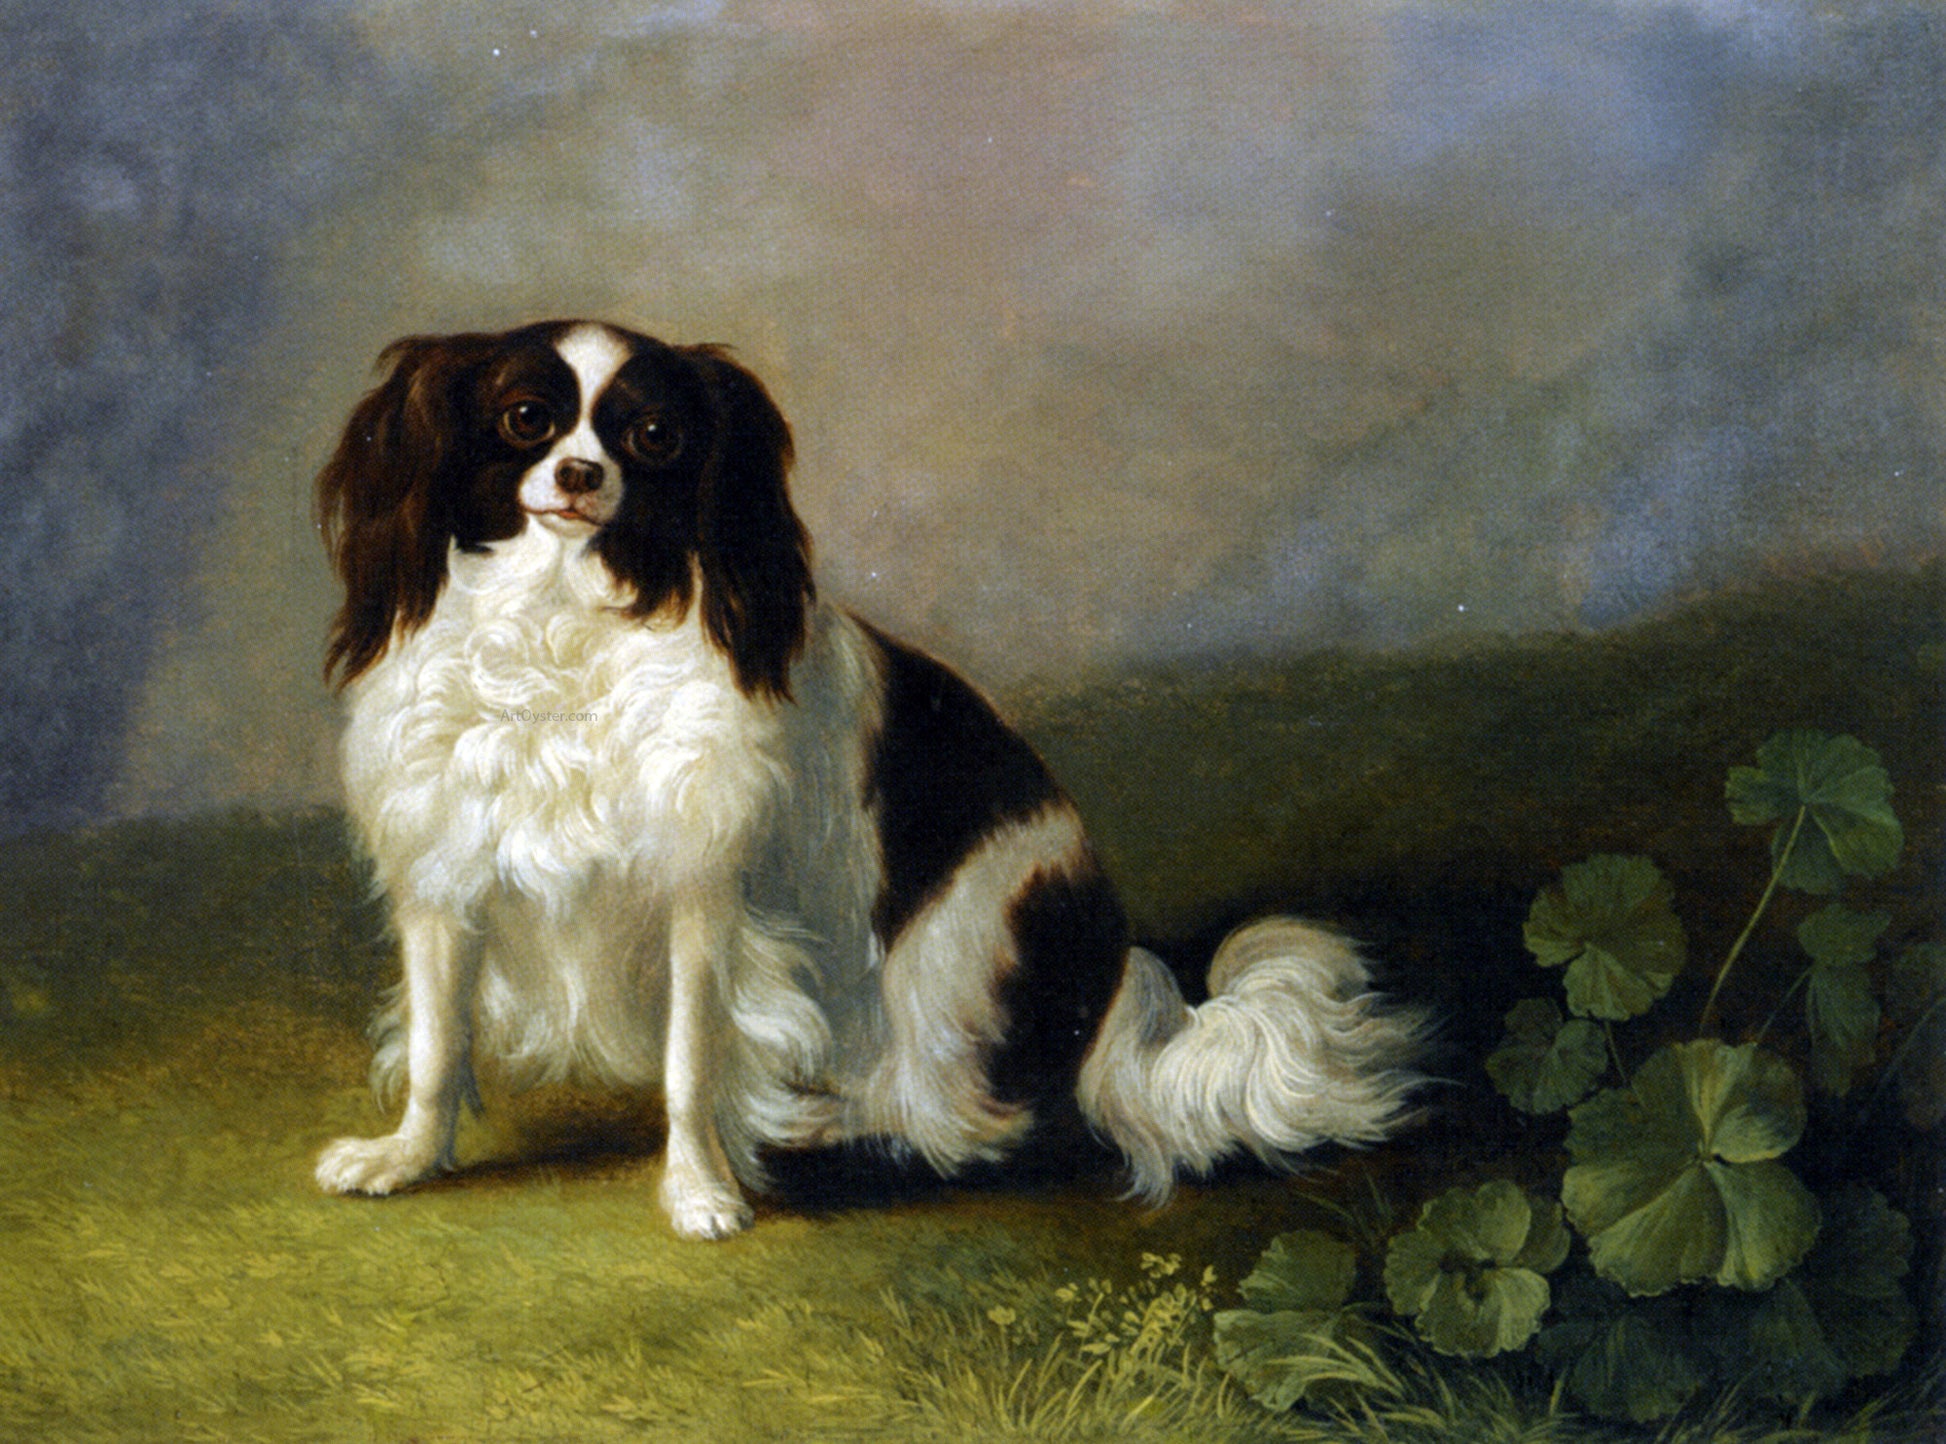  Jacob Philipp Hackert A King Charles Spaniel in a Landscape - Hand Painted Oil Painting